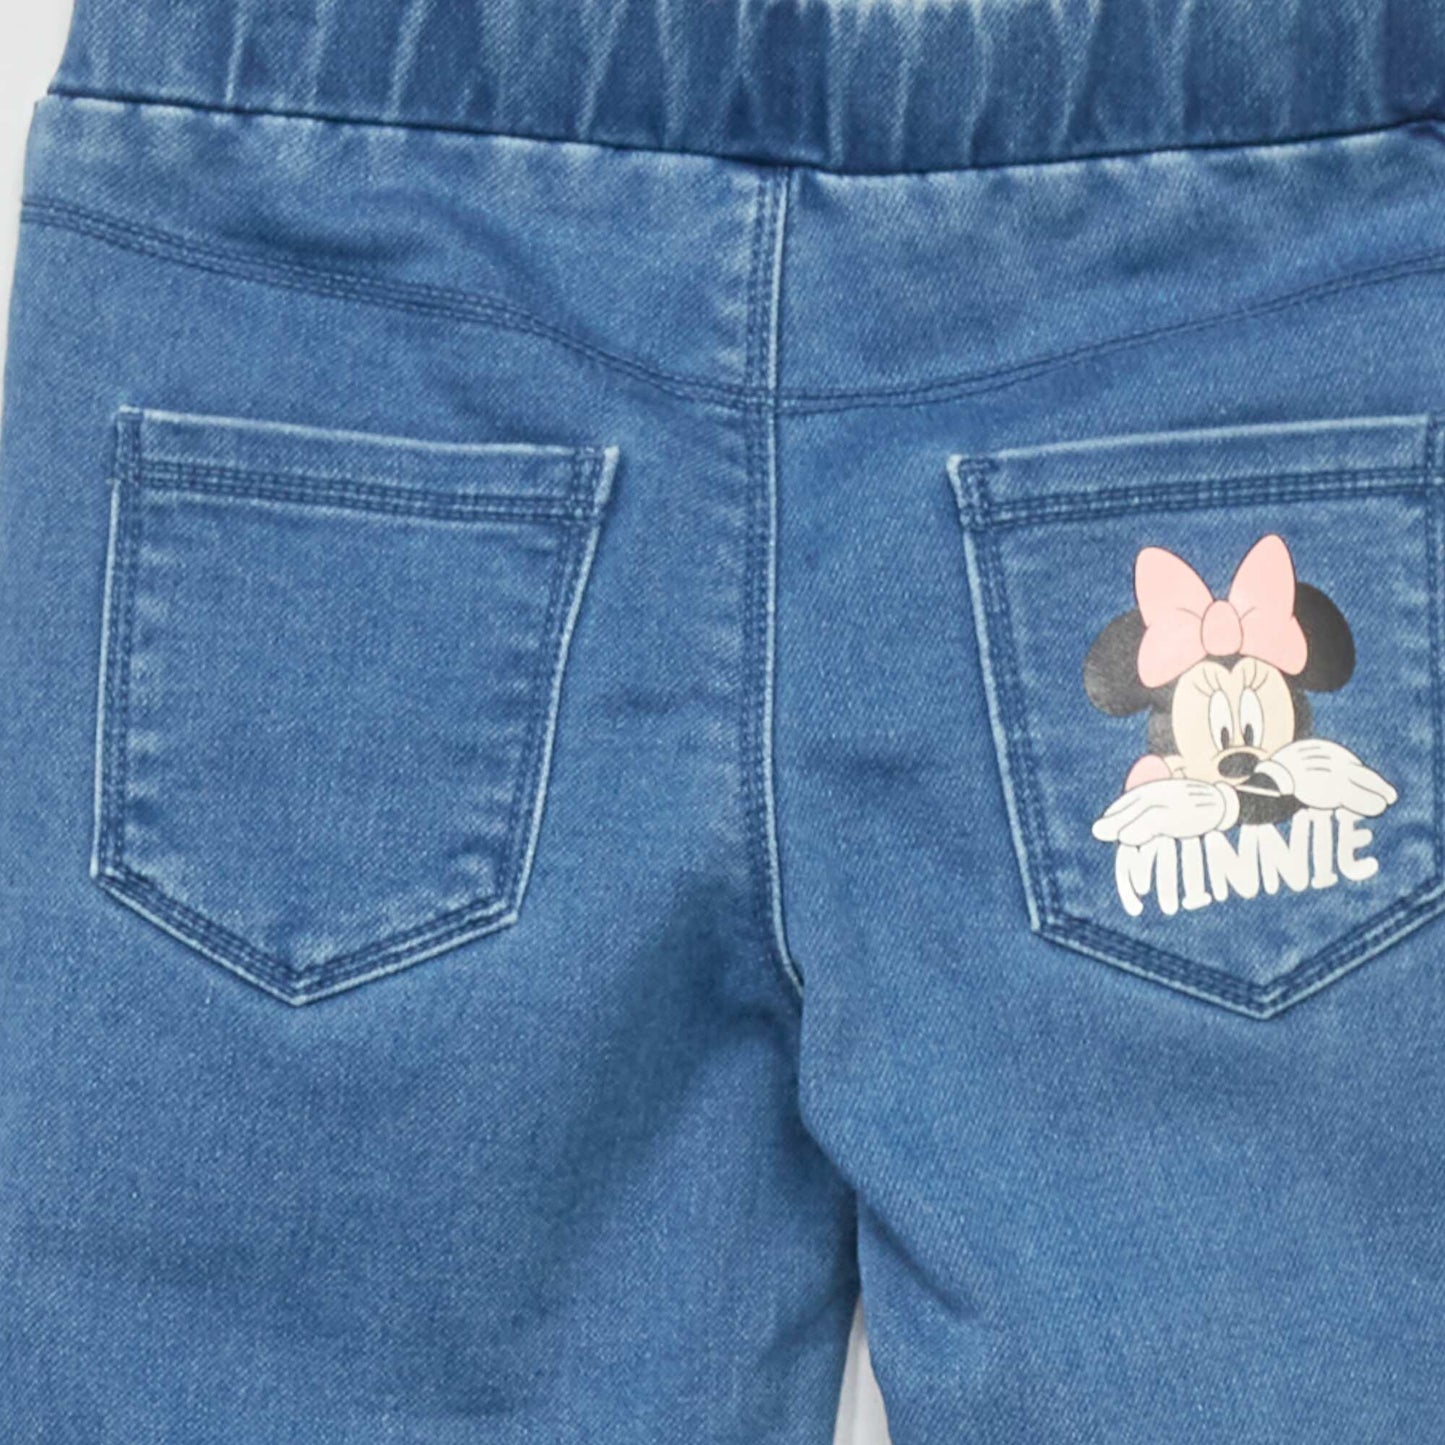 Disney Minnie Mouse stretch jeggings BLUE